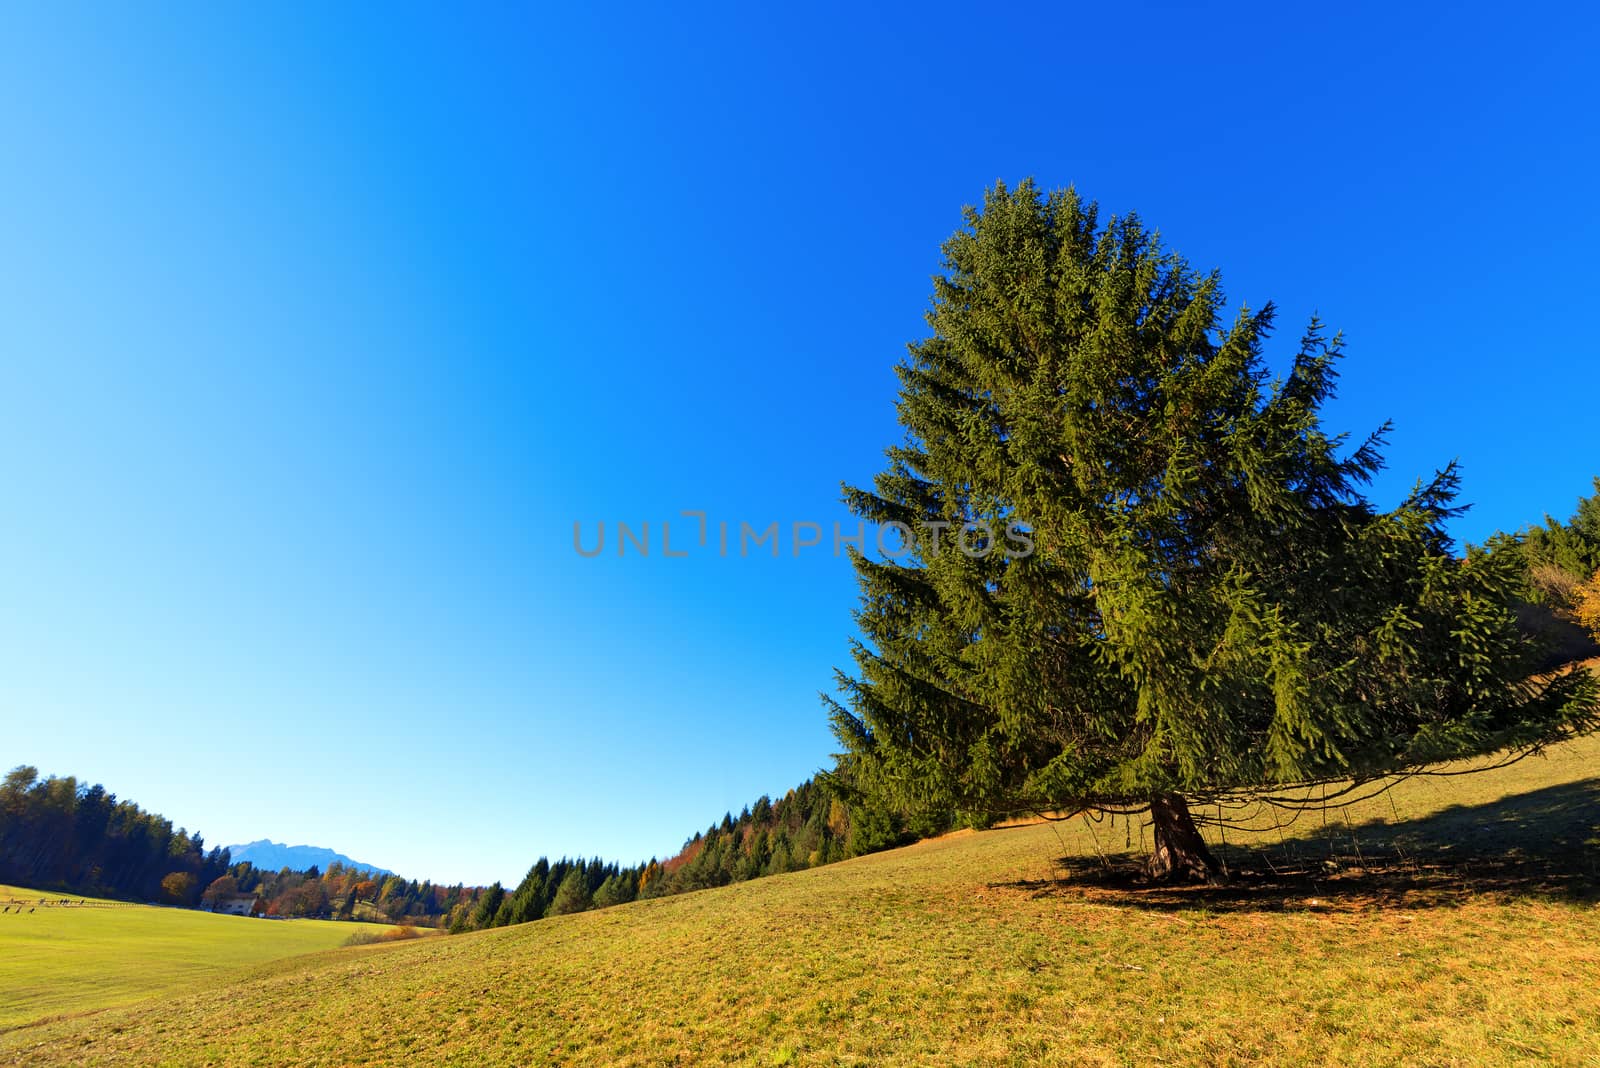 Large pine tree on the green grass and blue sky in autumn. Val di Sella (Sella Valley), Borgo Valsugana, Trento, Italy